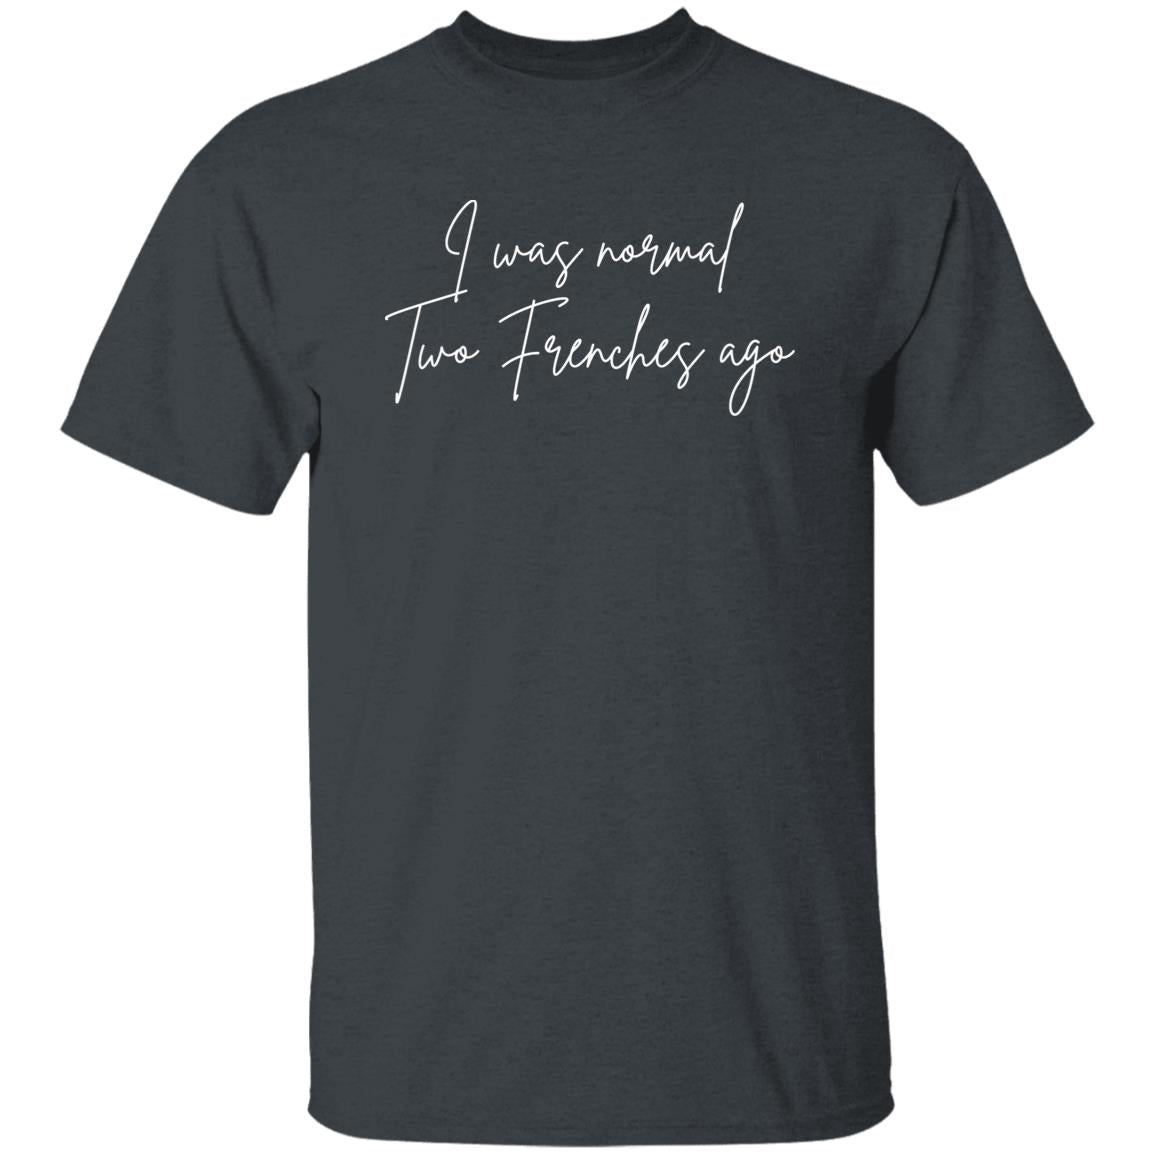 Frenches Owner Unisex Shirt I was normal two Frenches ago Dark Heather-Dark Heather-Family-Gift-Planet